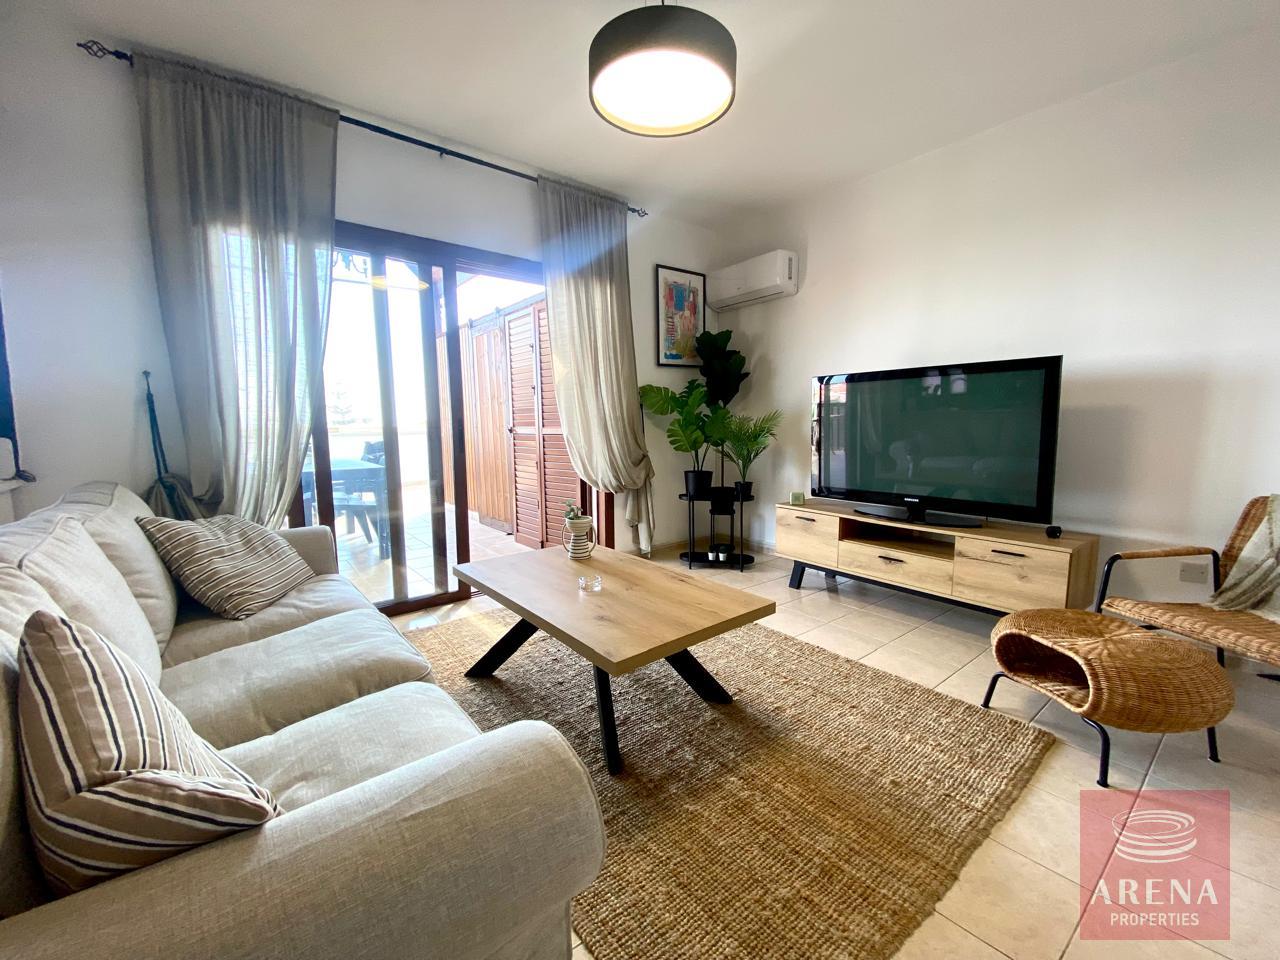 2 bed flat for rent in Kapparis